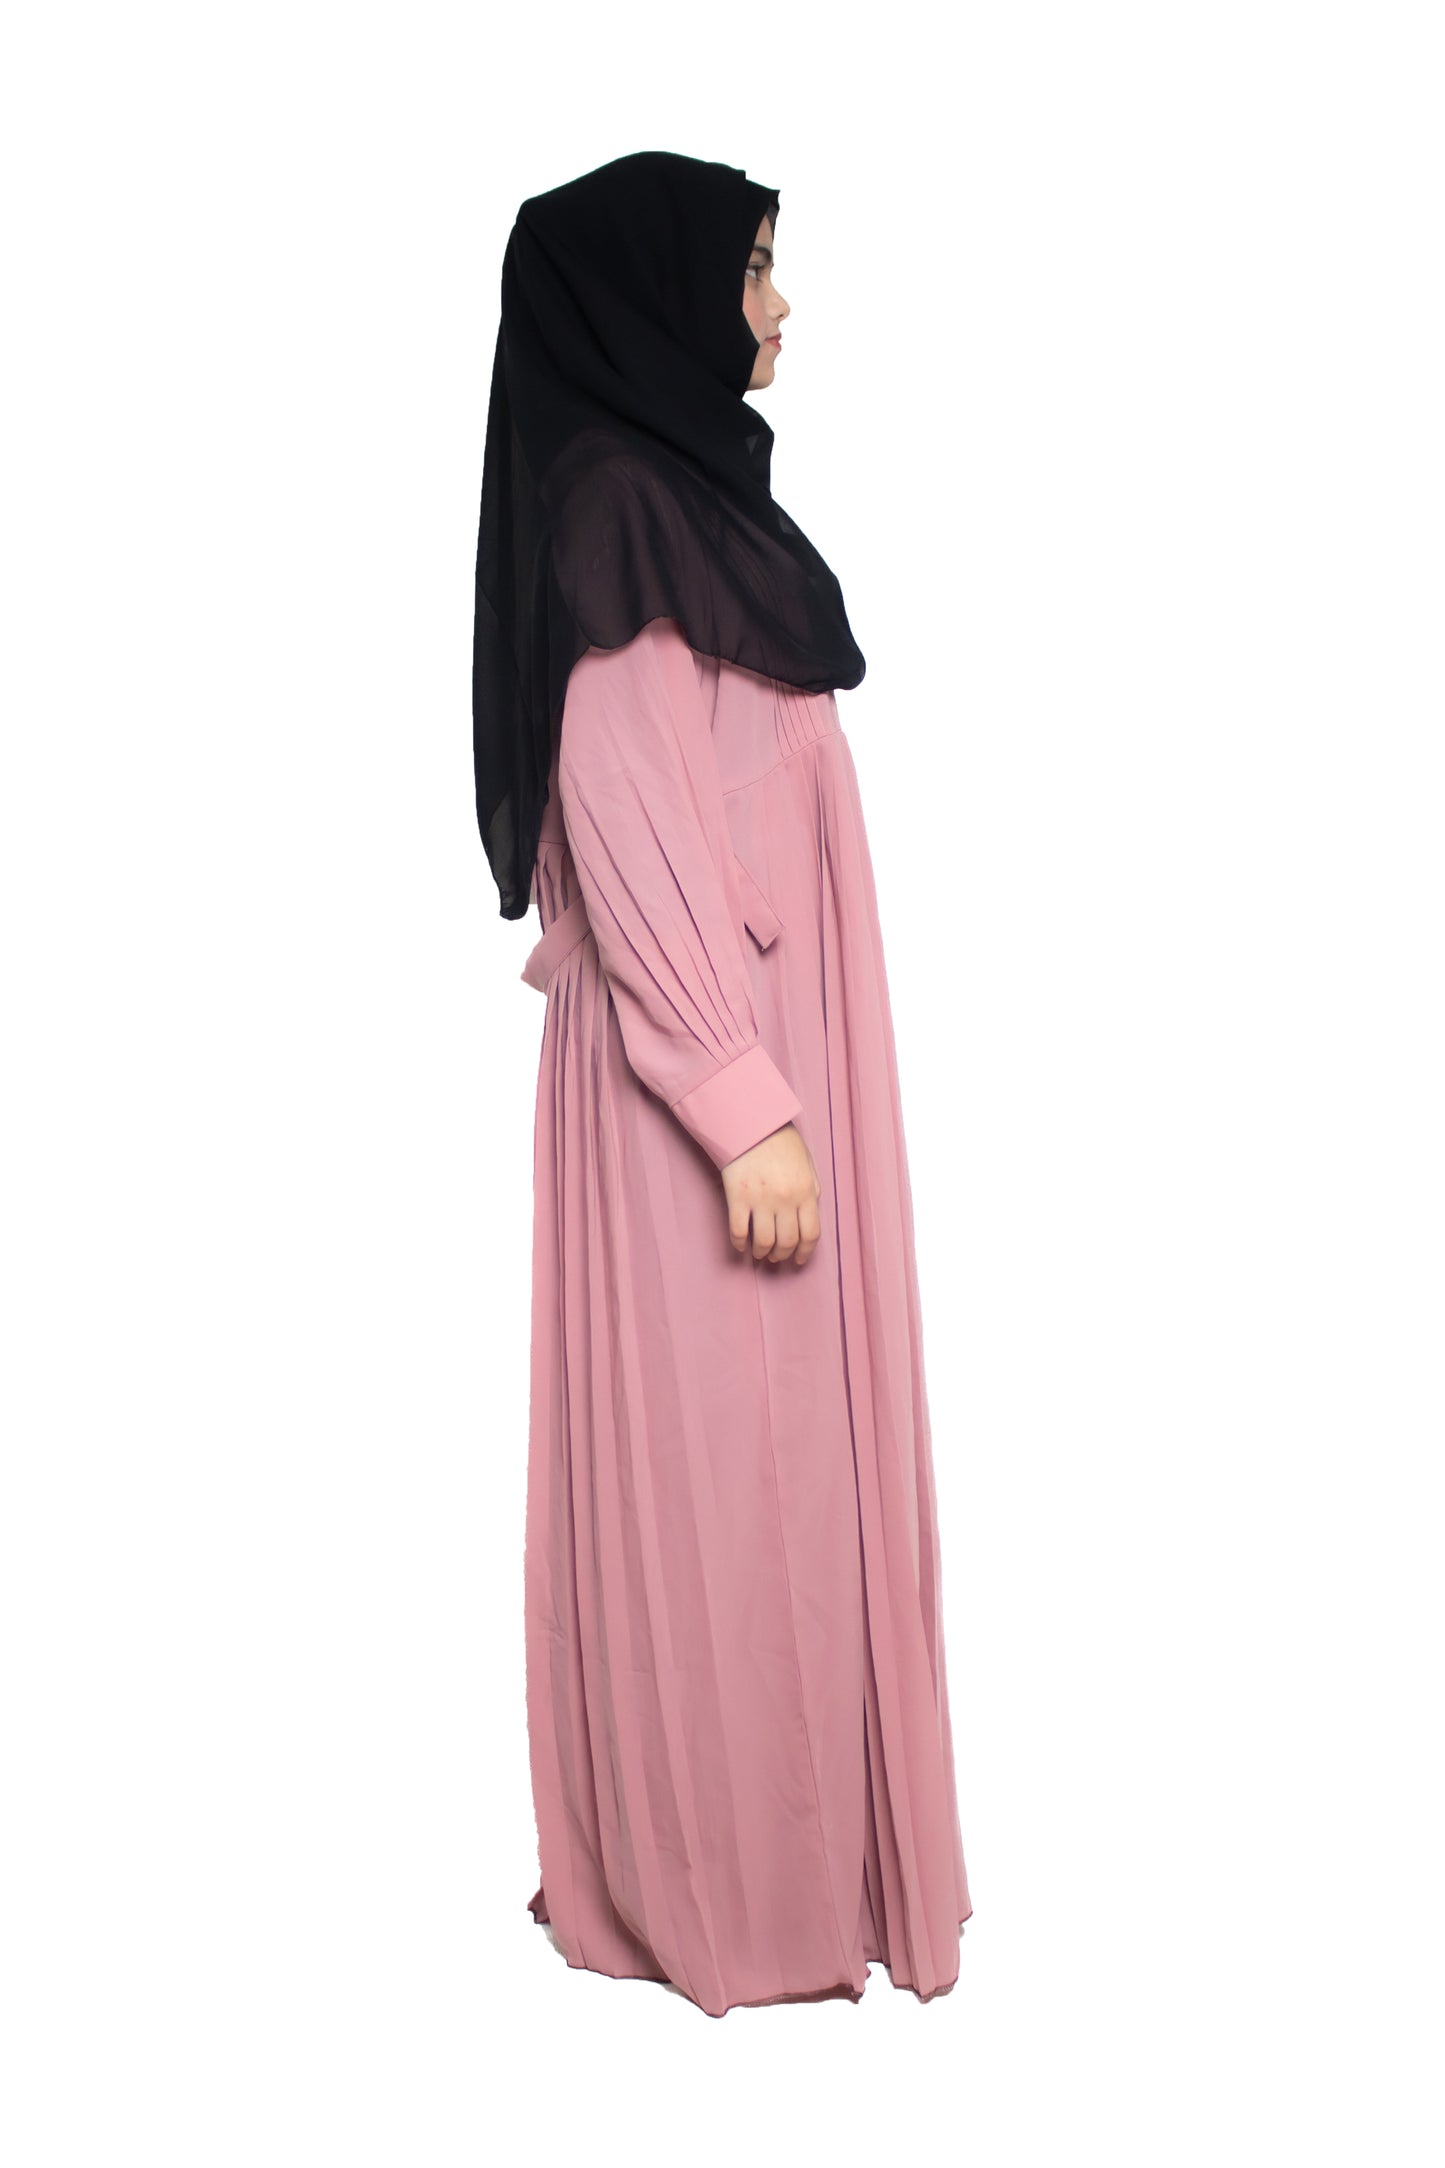 Modest City Self Design Light Pink Button With Plate Abaya or Burqa With Hijab for Women & Girls-Series Laiba